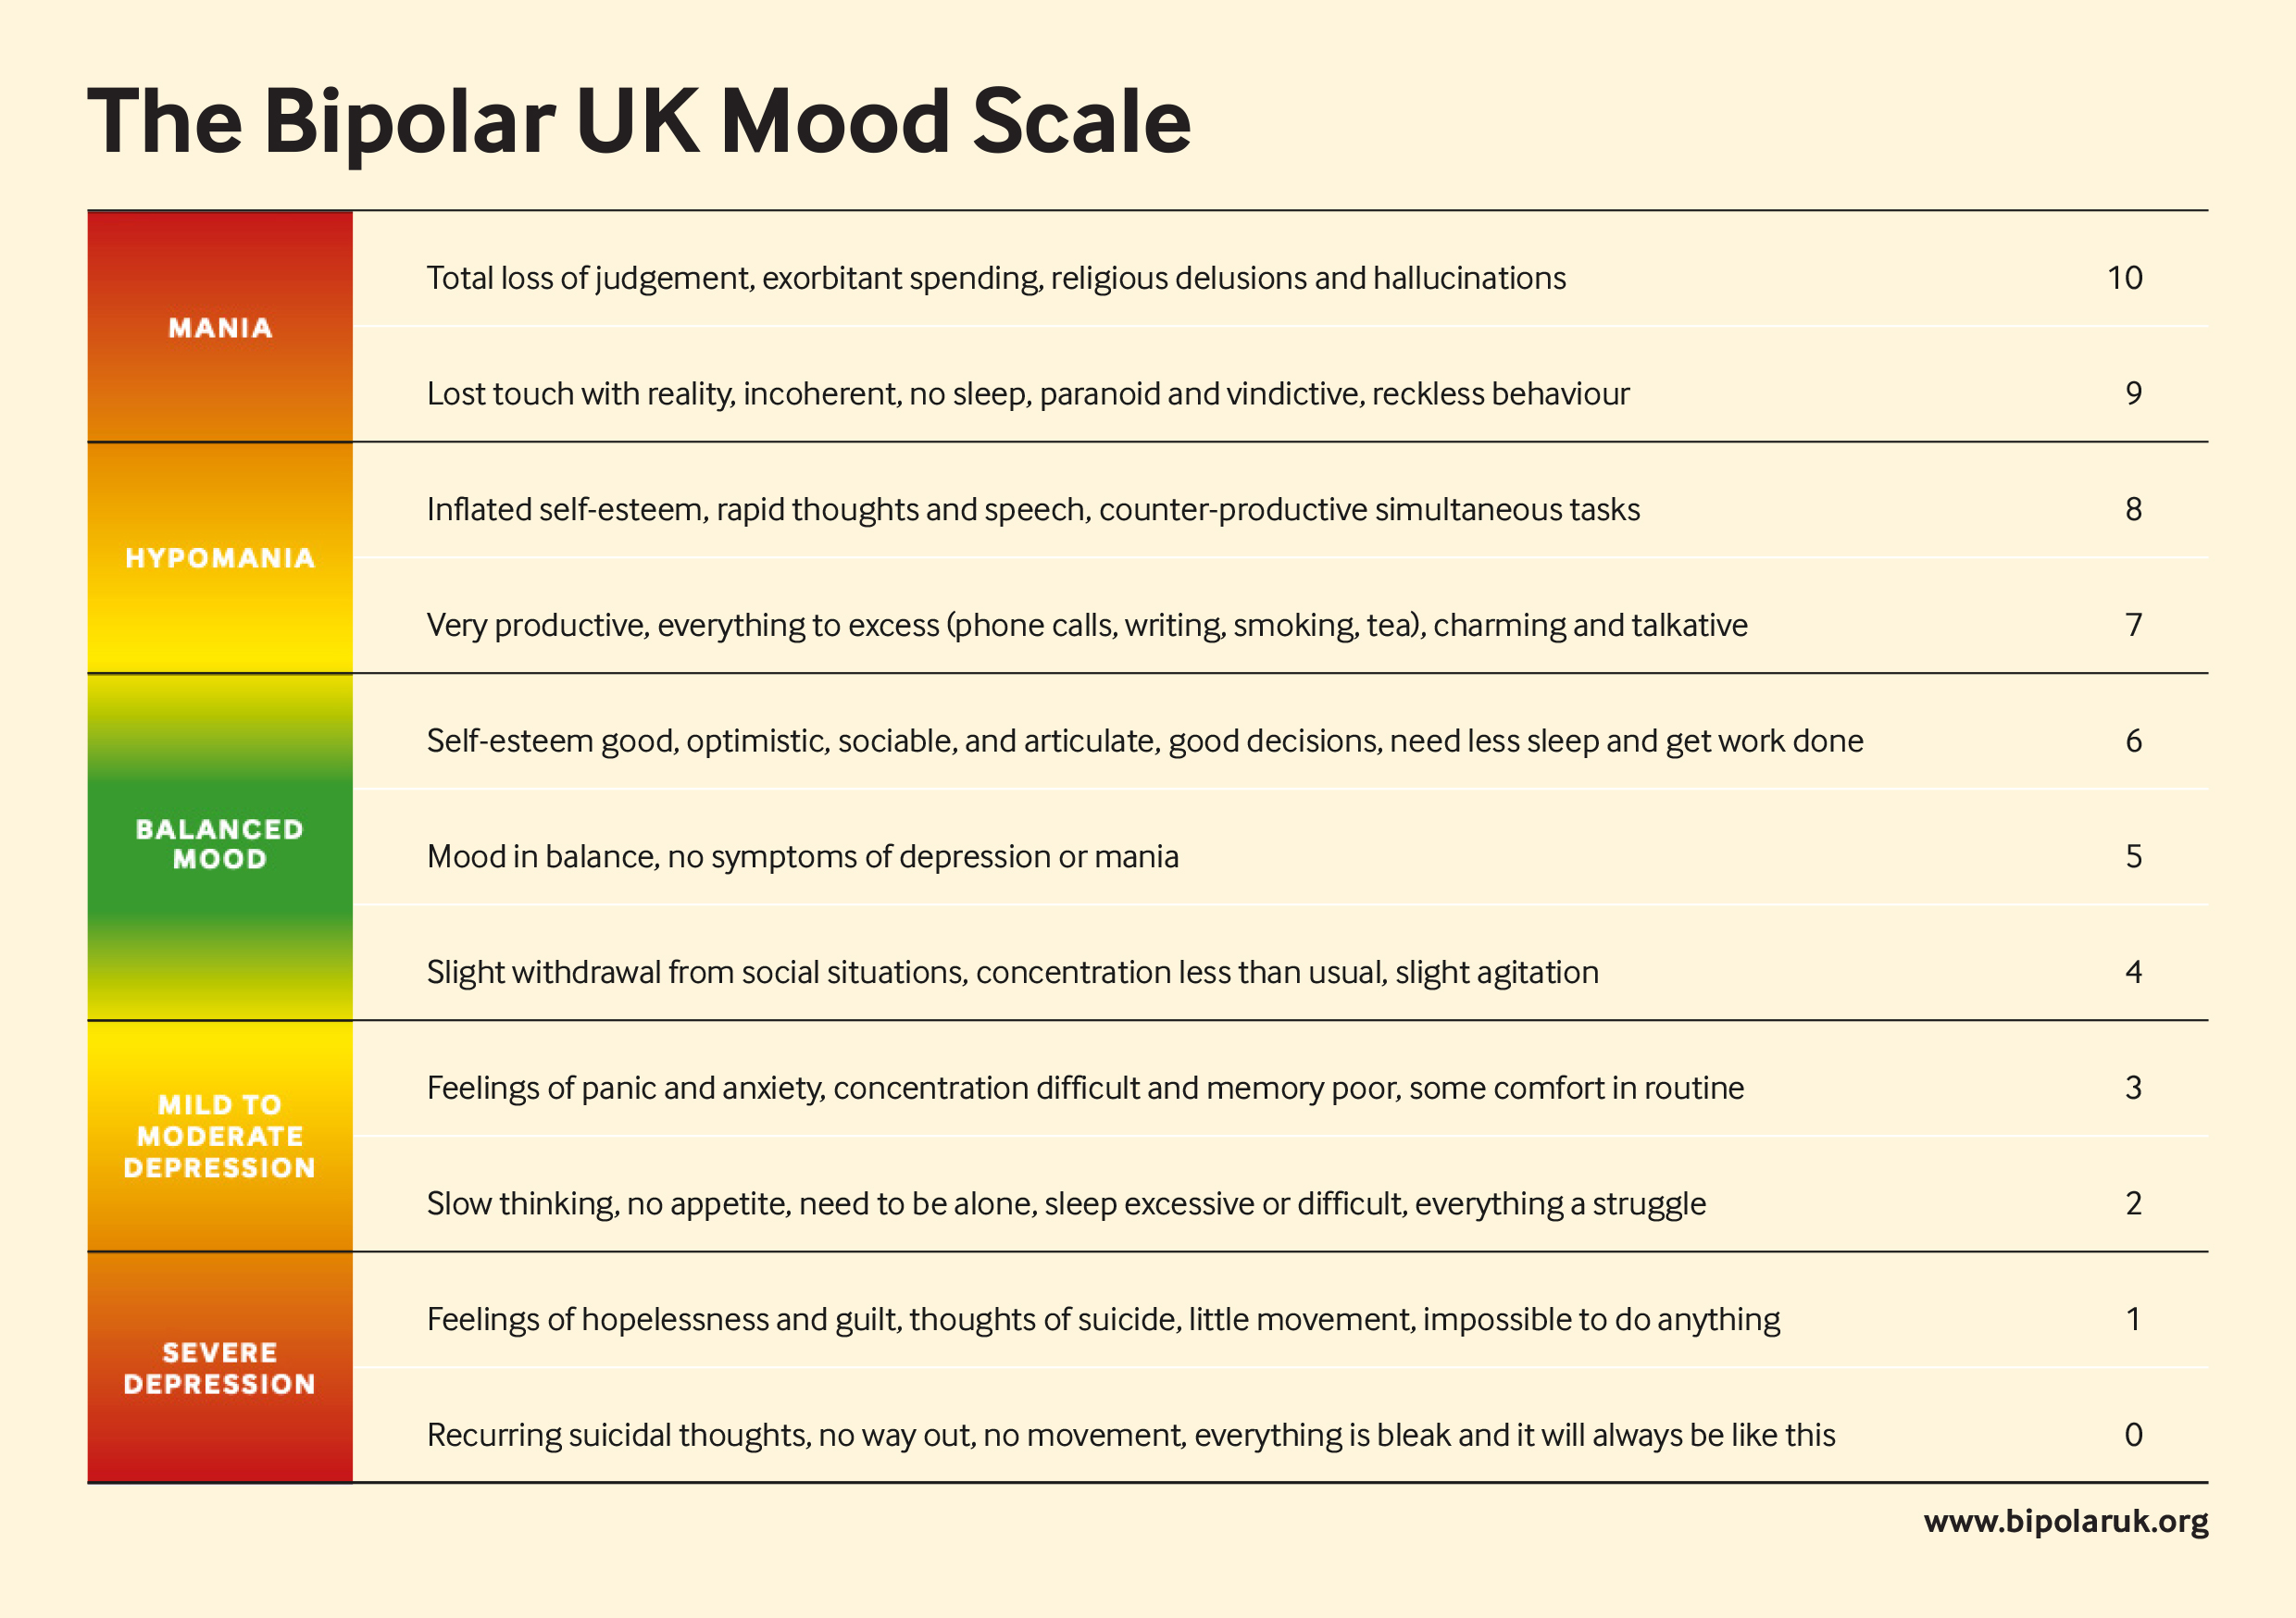 A mood scale from bipolar UK